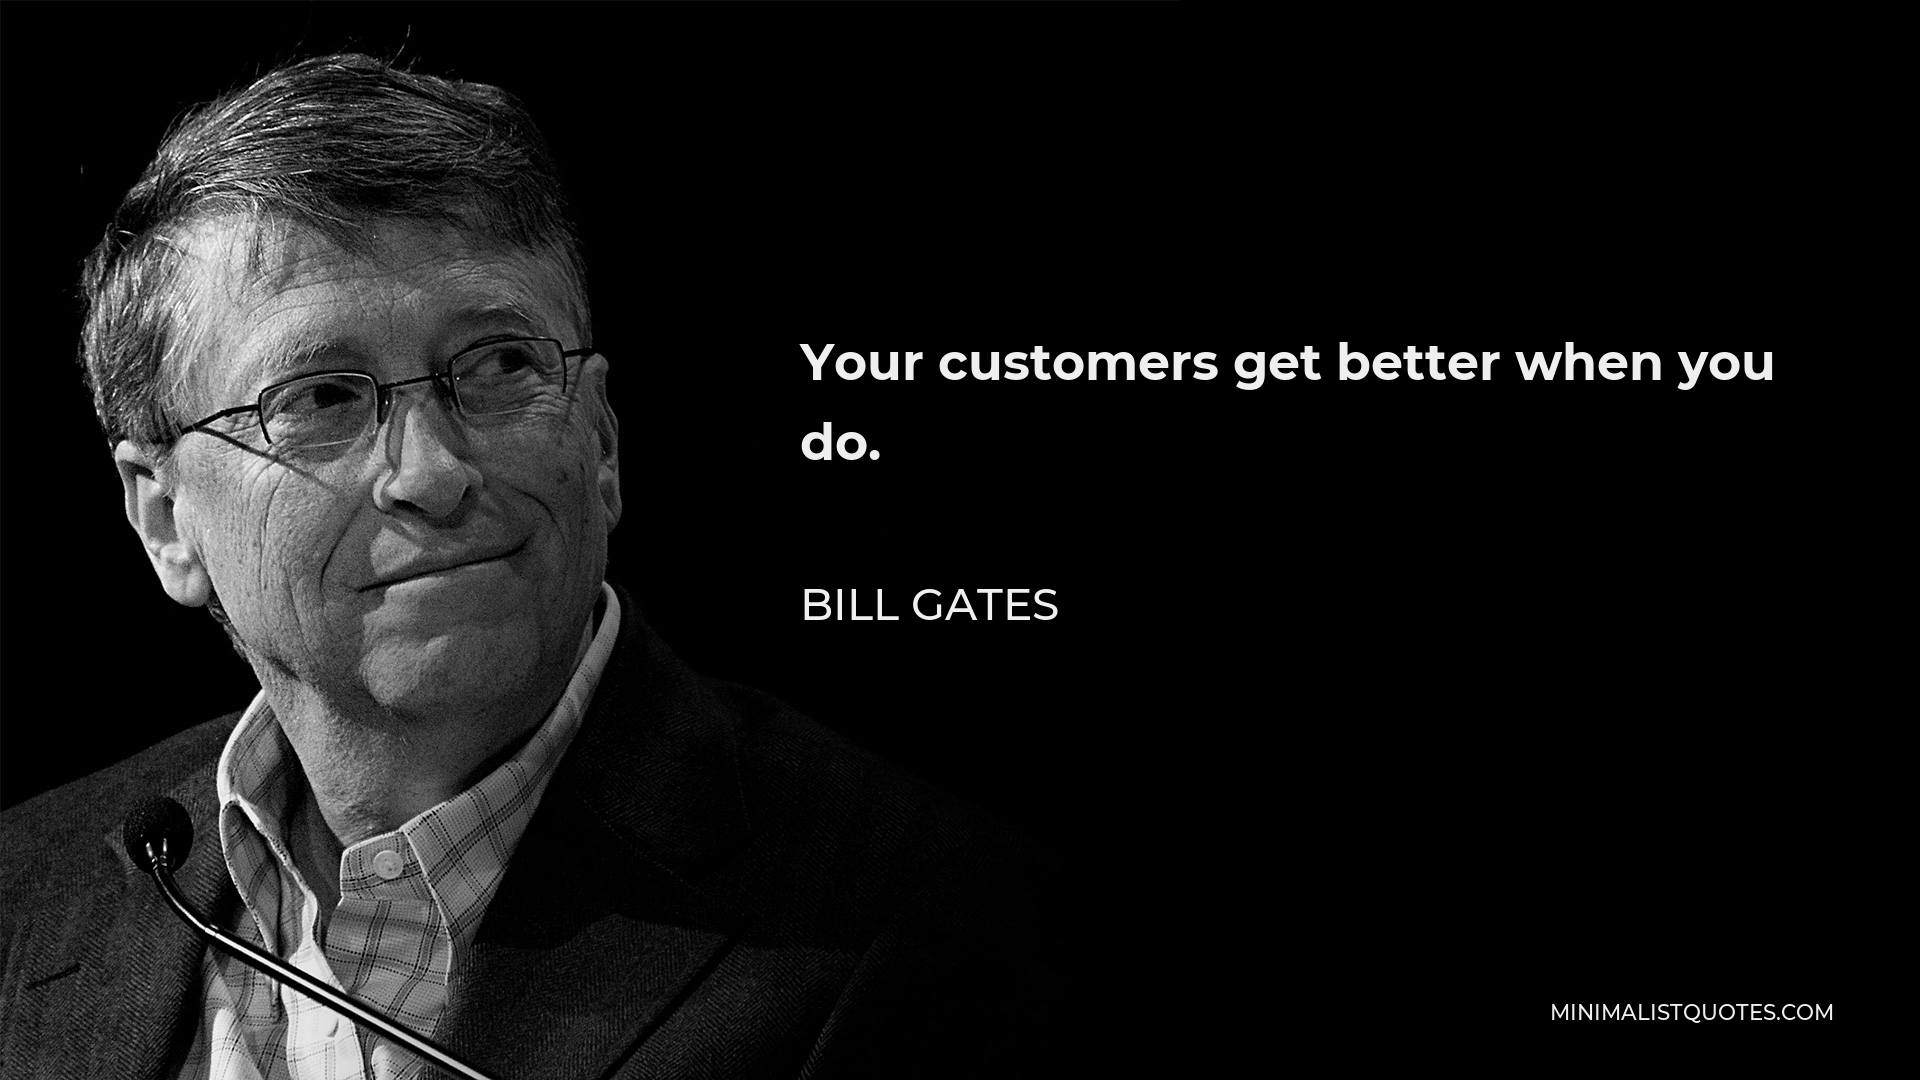 Bill Gates Quote - Your customers get better when you do.